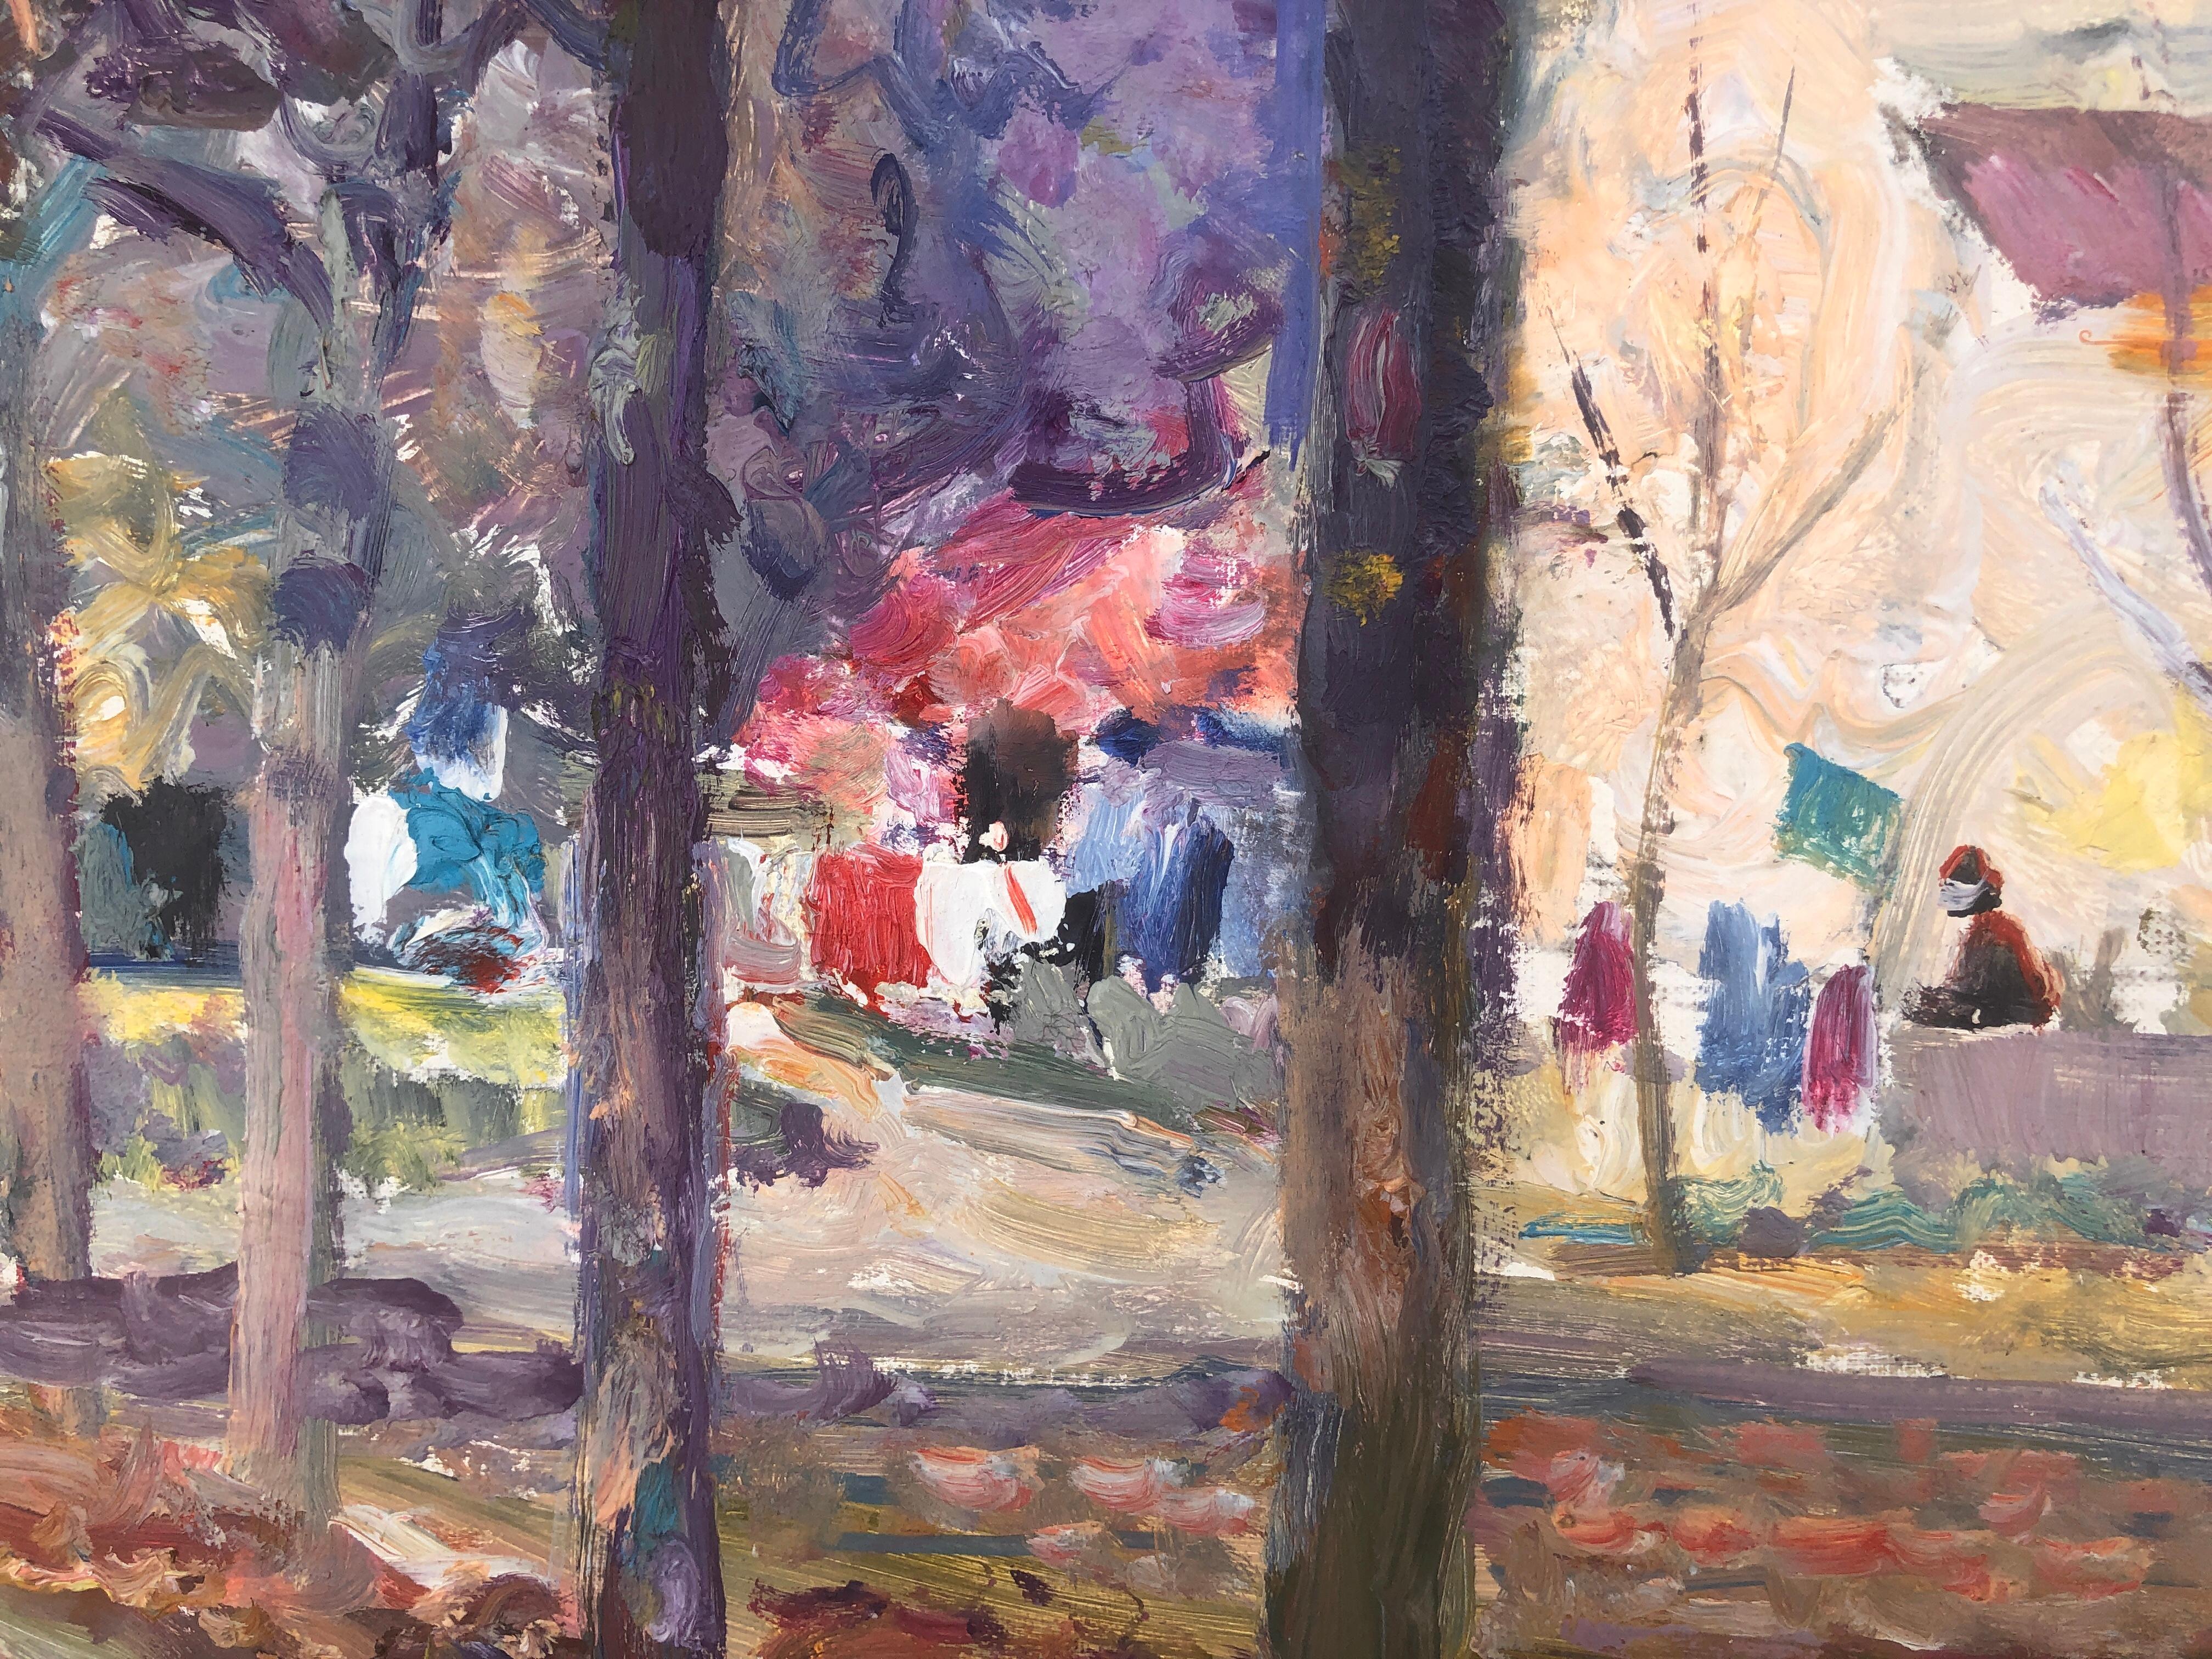 Jordi Freixas Cortés (1917-1984) - Walking in the park - Oil on canvas
Oil measures 54x65 cm.
Frame measures 62x72 cm.
Lossy frame.

Jordi Freixas Cortés (1917-1984)

Jordi Freixas Cortés is a Catalan painter with a colorful instinct and high